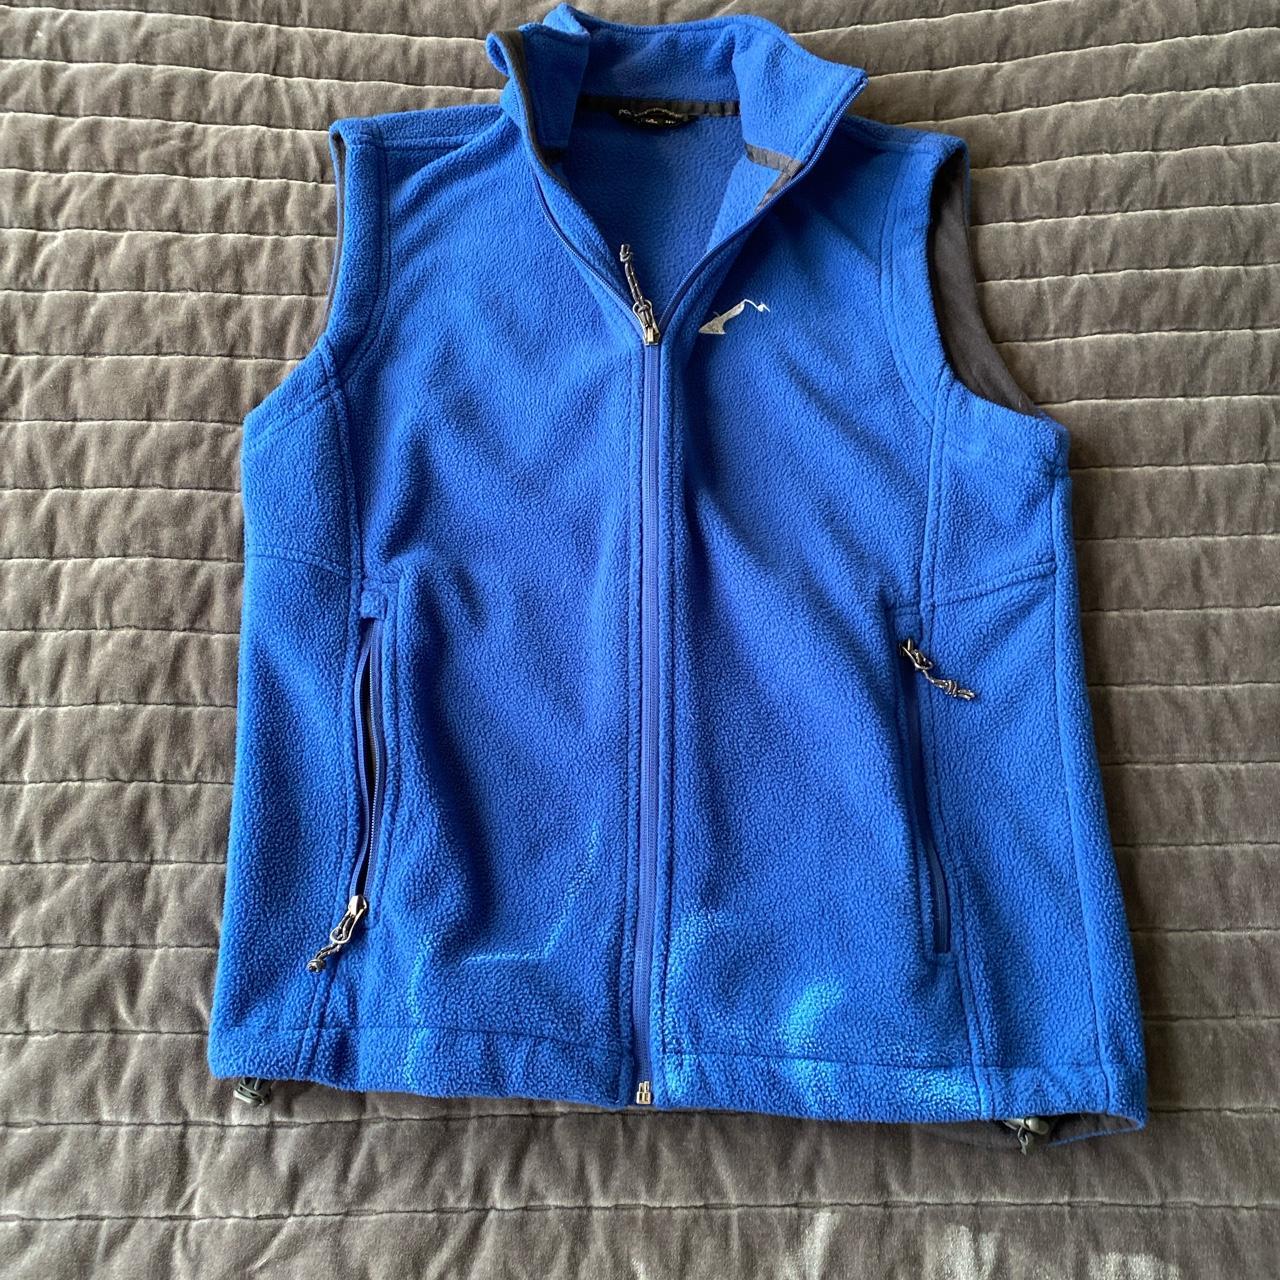 (WINTER VEST BUNDLE) Found these at a thrift store a... - Depop